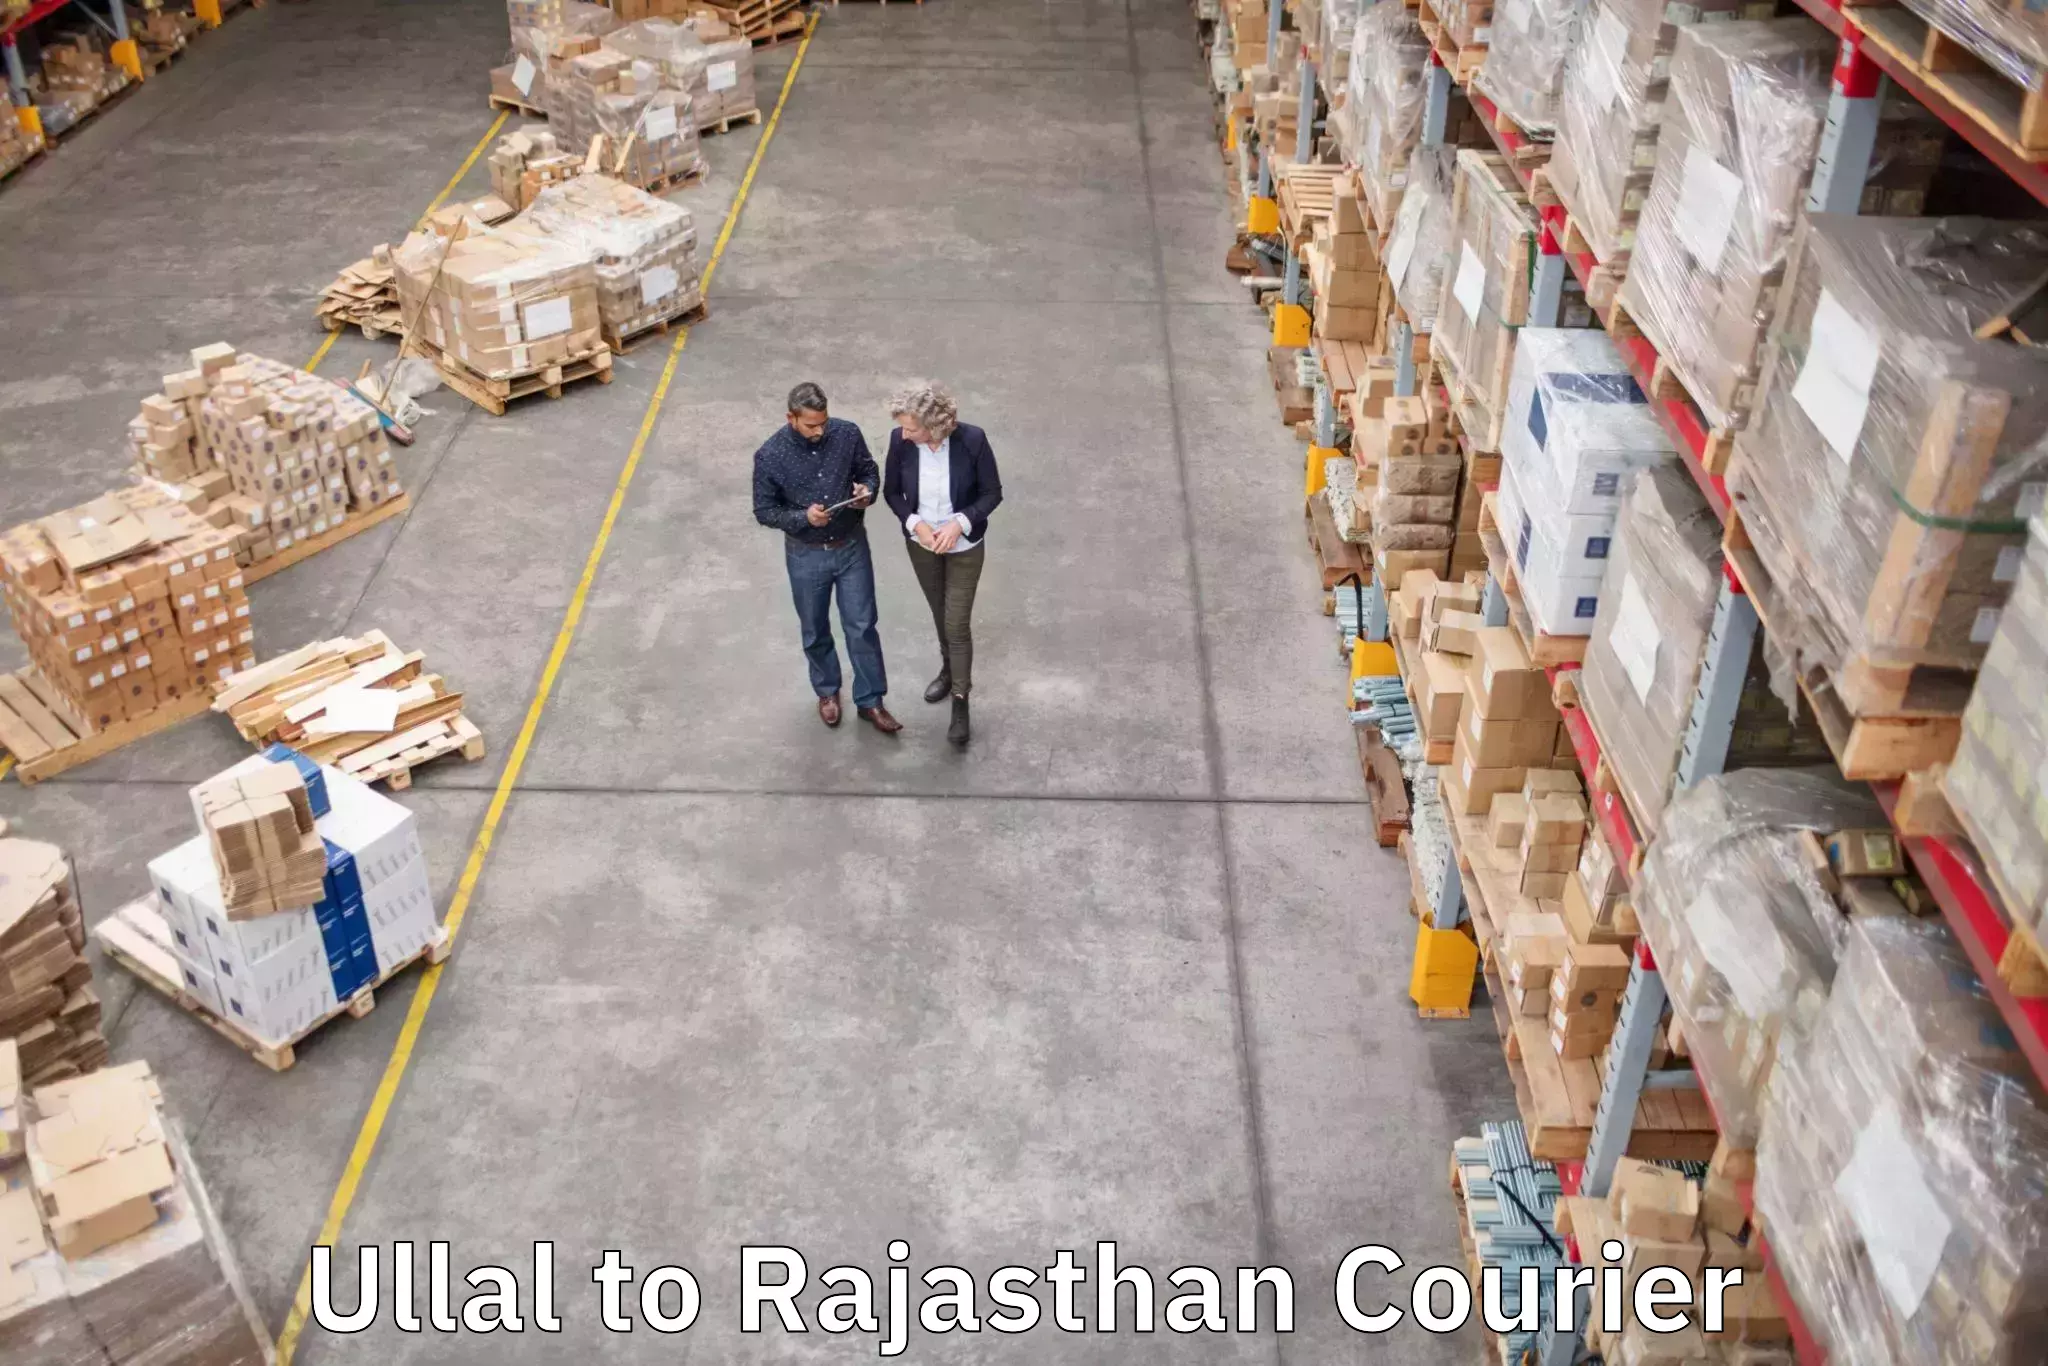 Luggage shipment specialists Ullal to Rajasthan